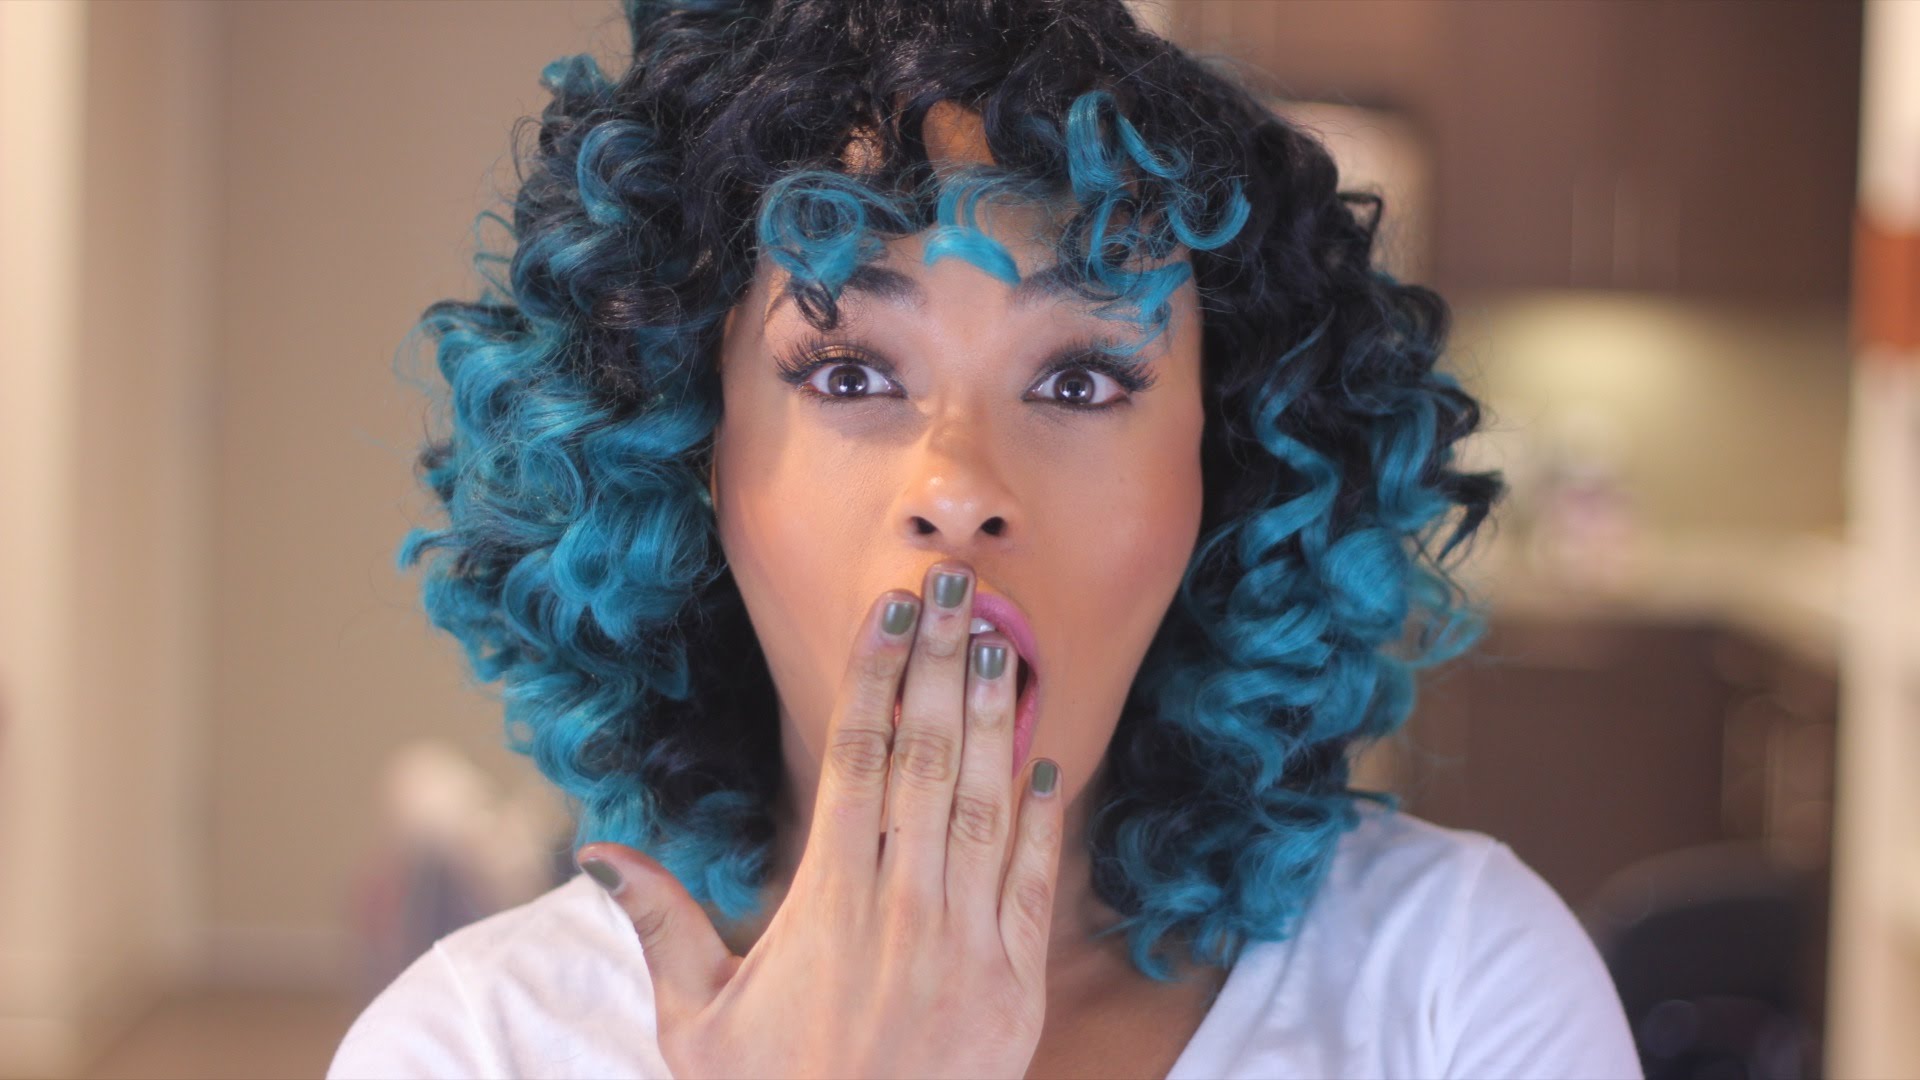 Blue Ombre Long Hair: 10 Stunning Styles to Try - wide 6